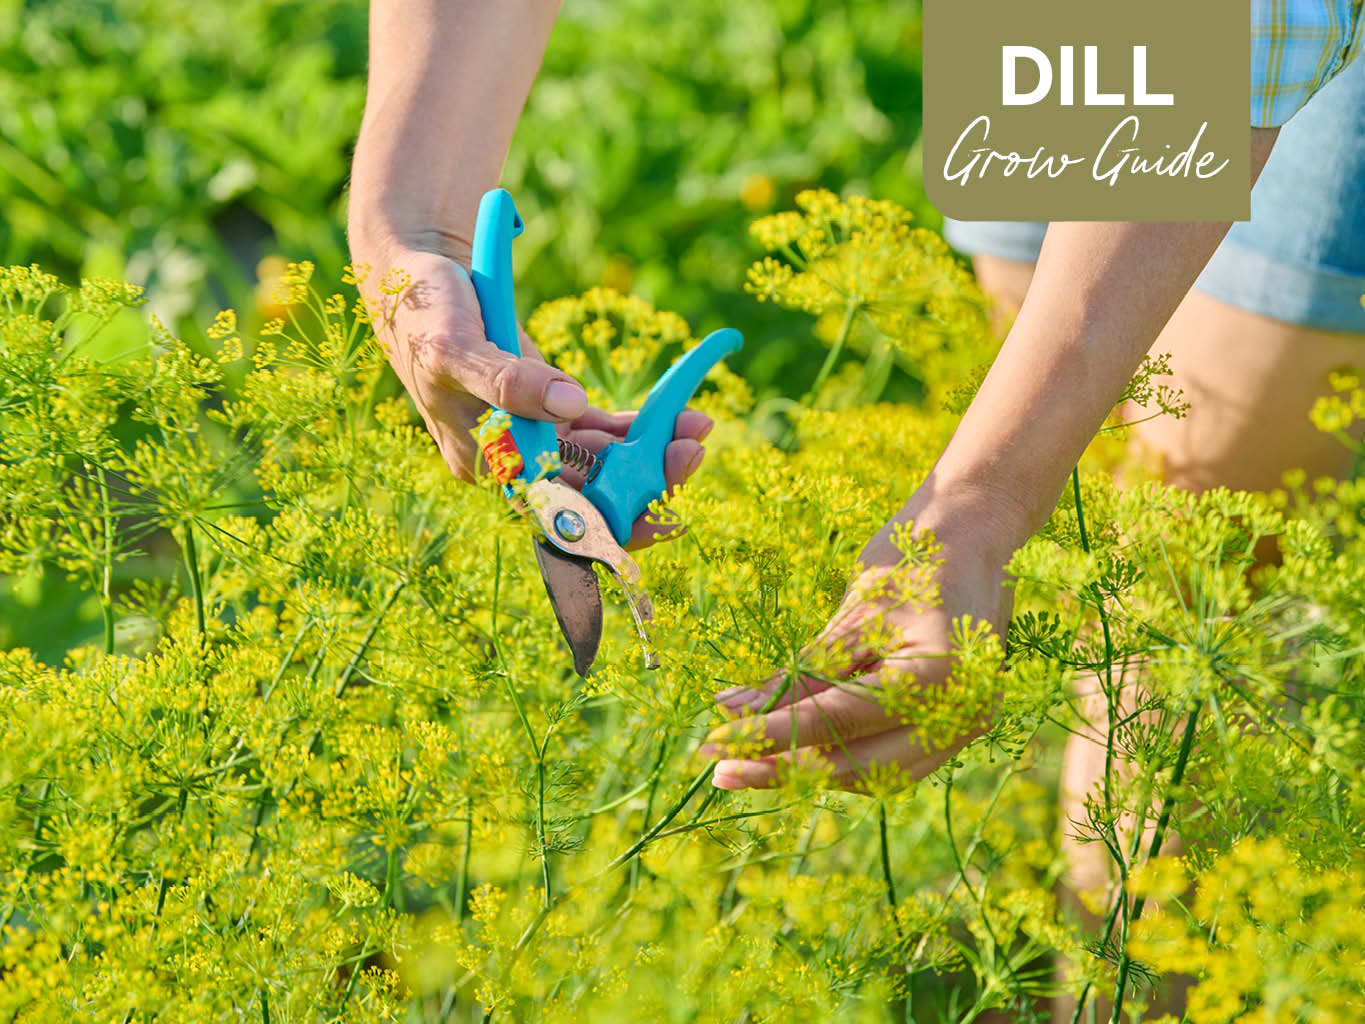 Woman harvesting dill flowers from the garden